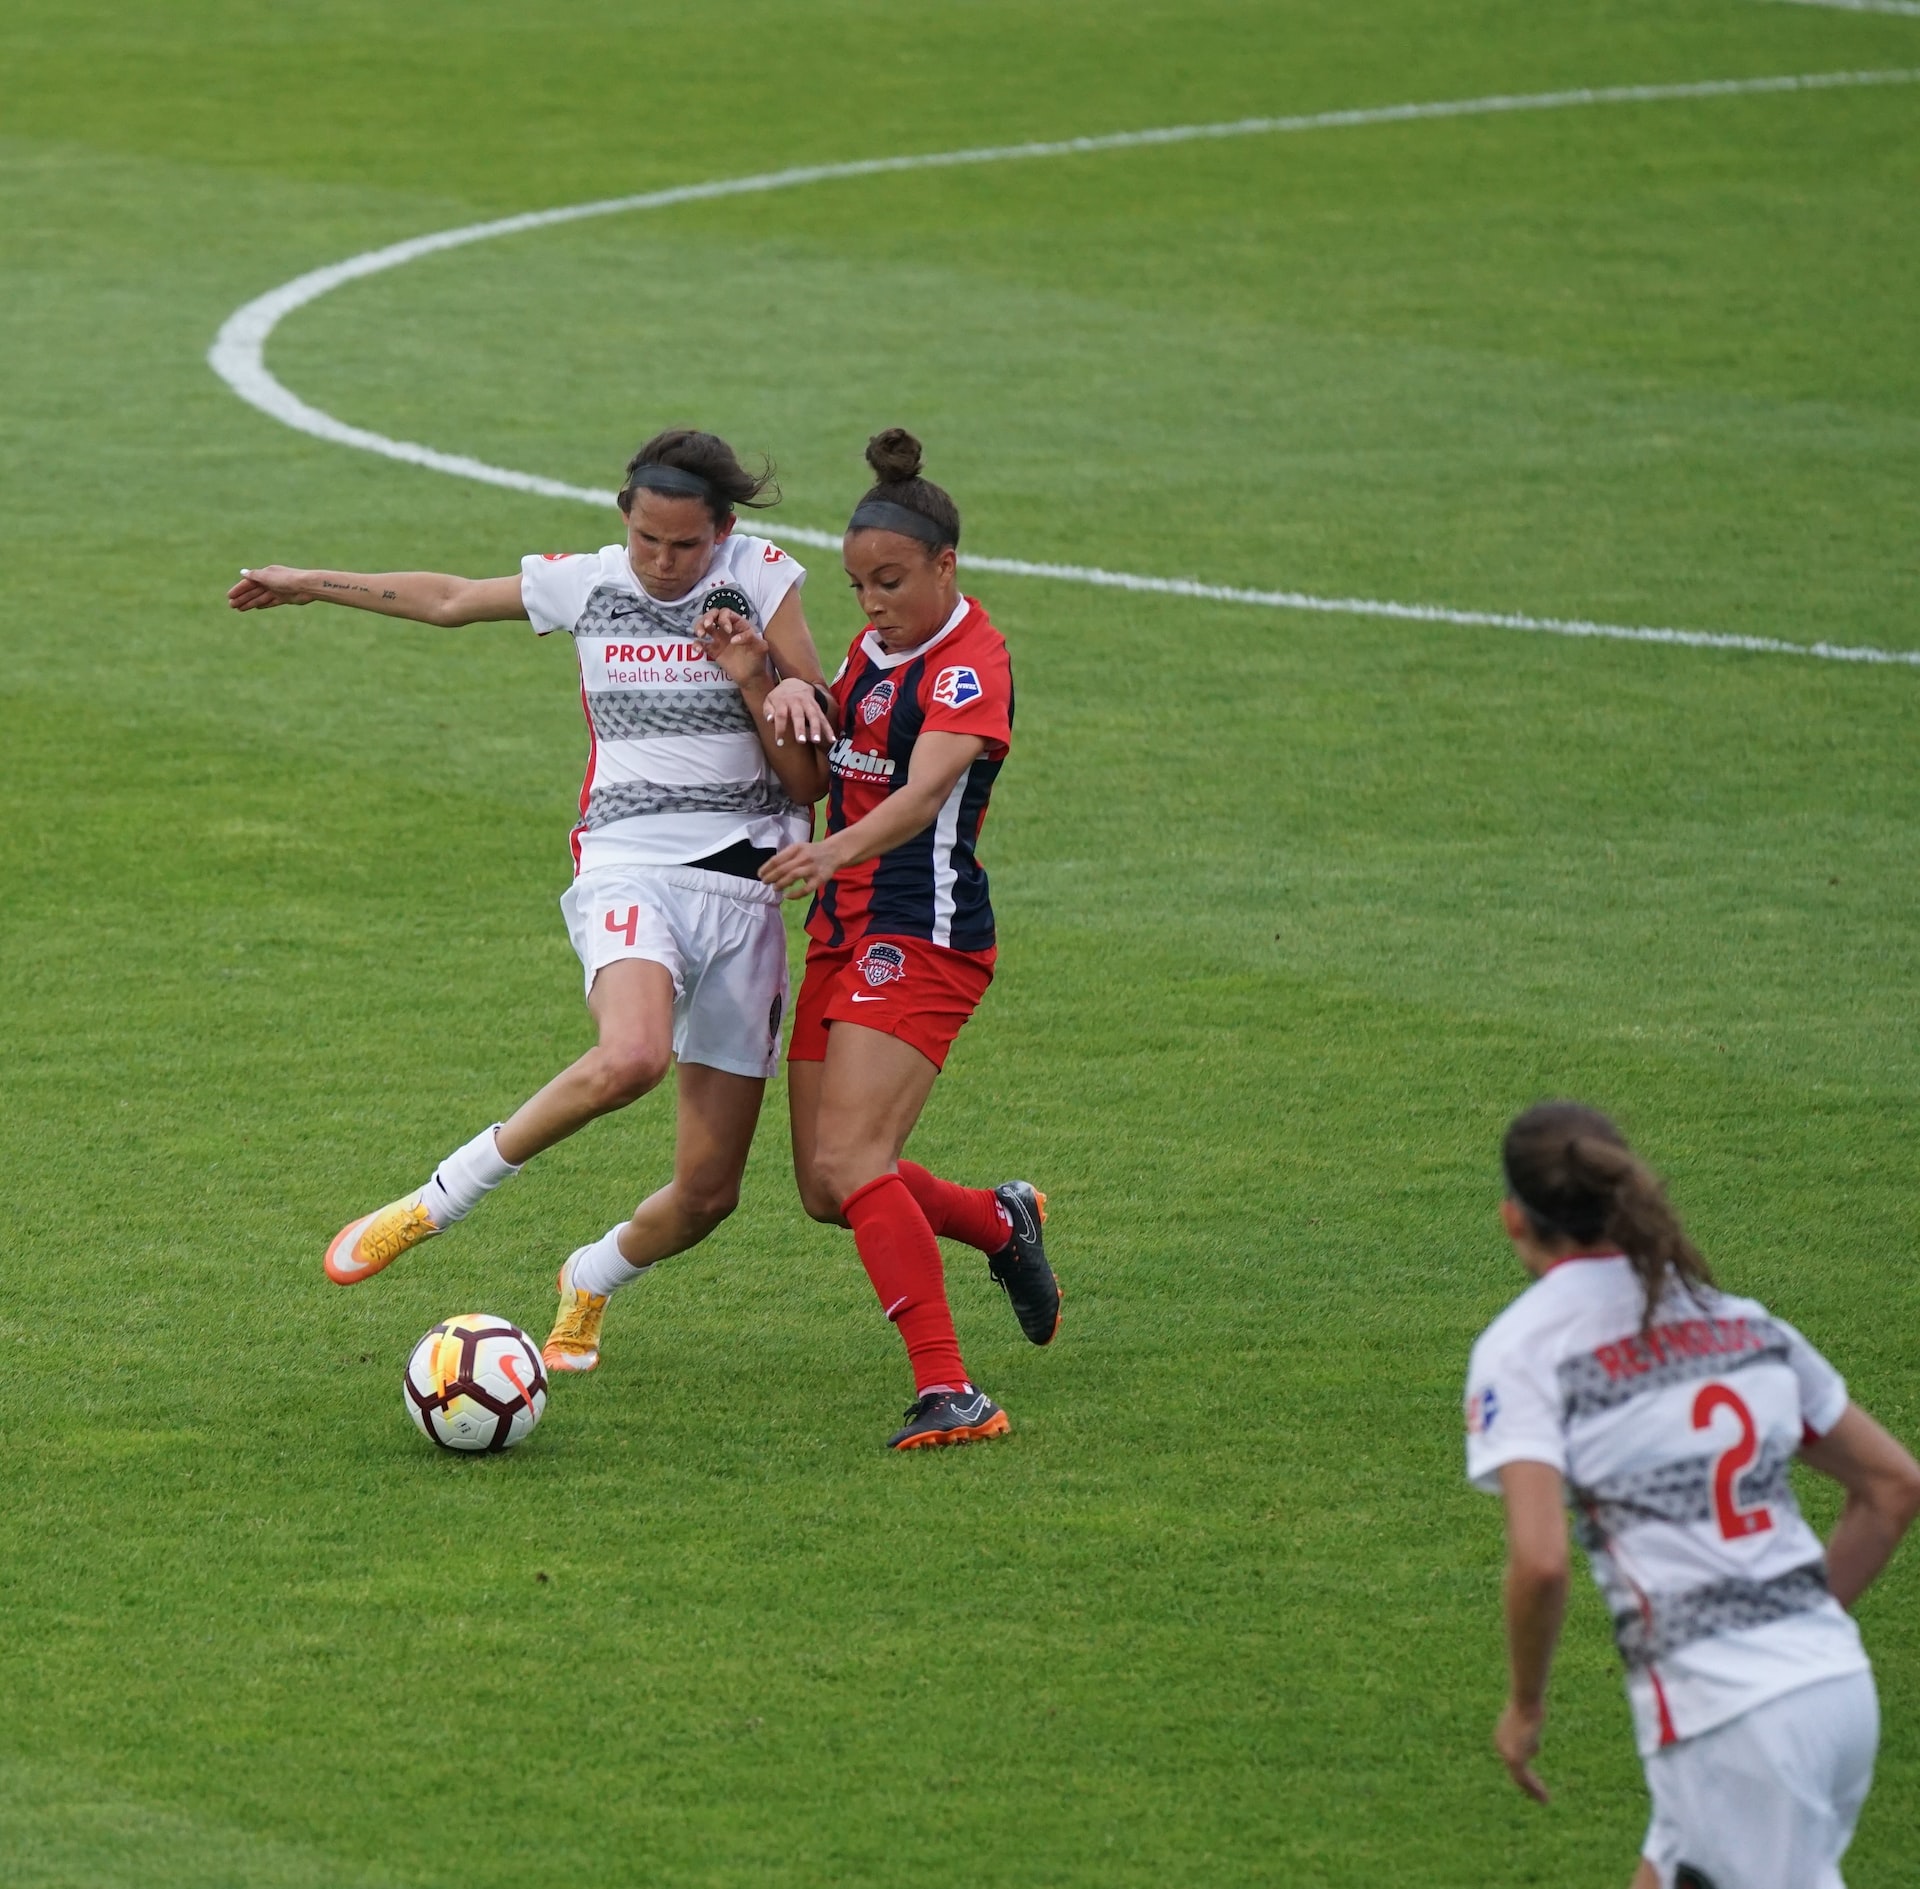 Female players are playing football.